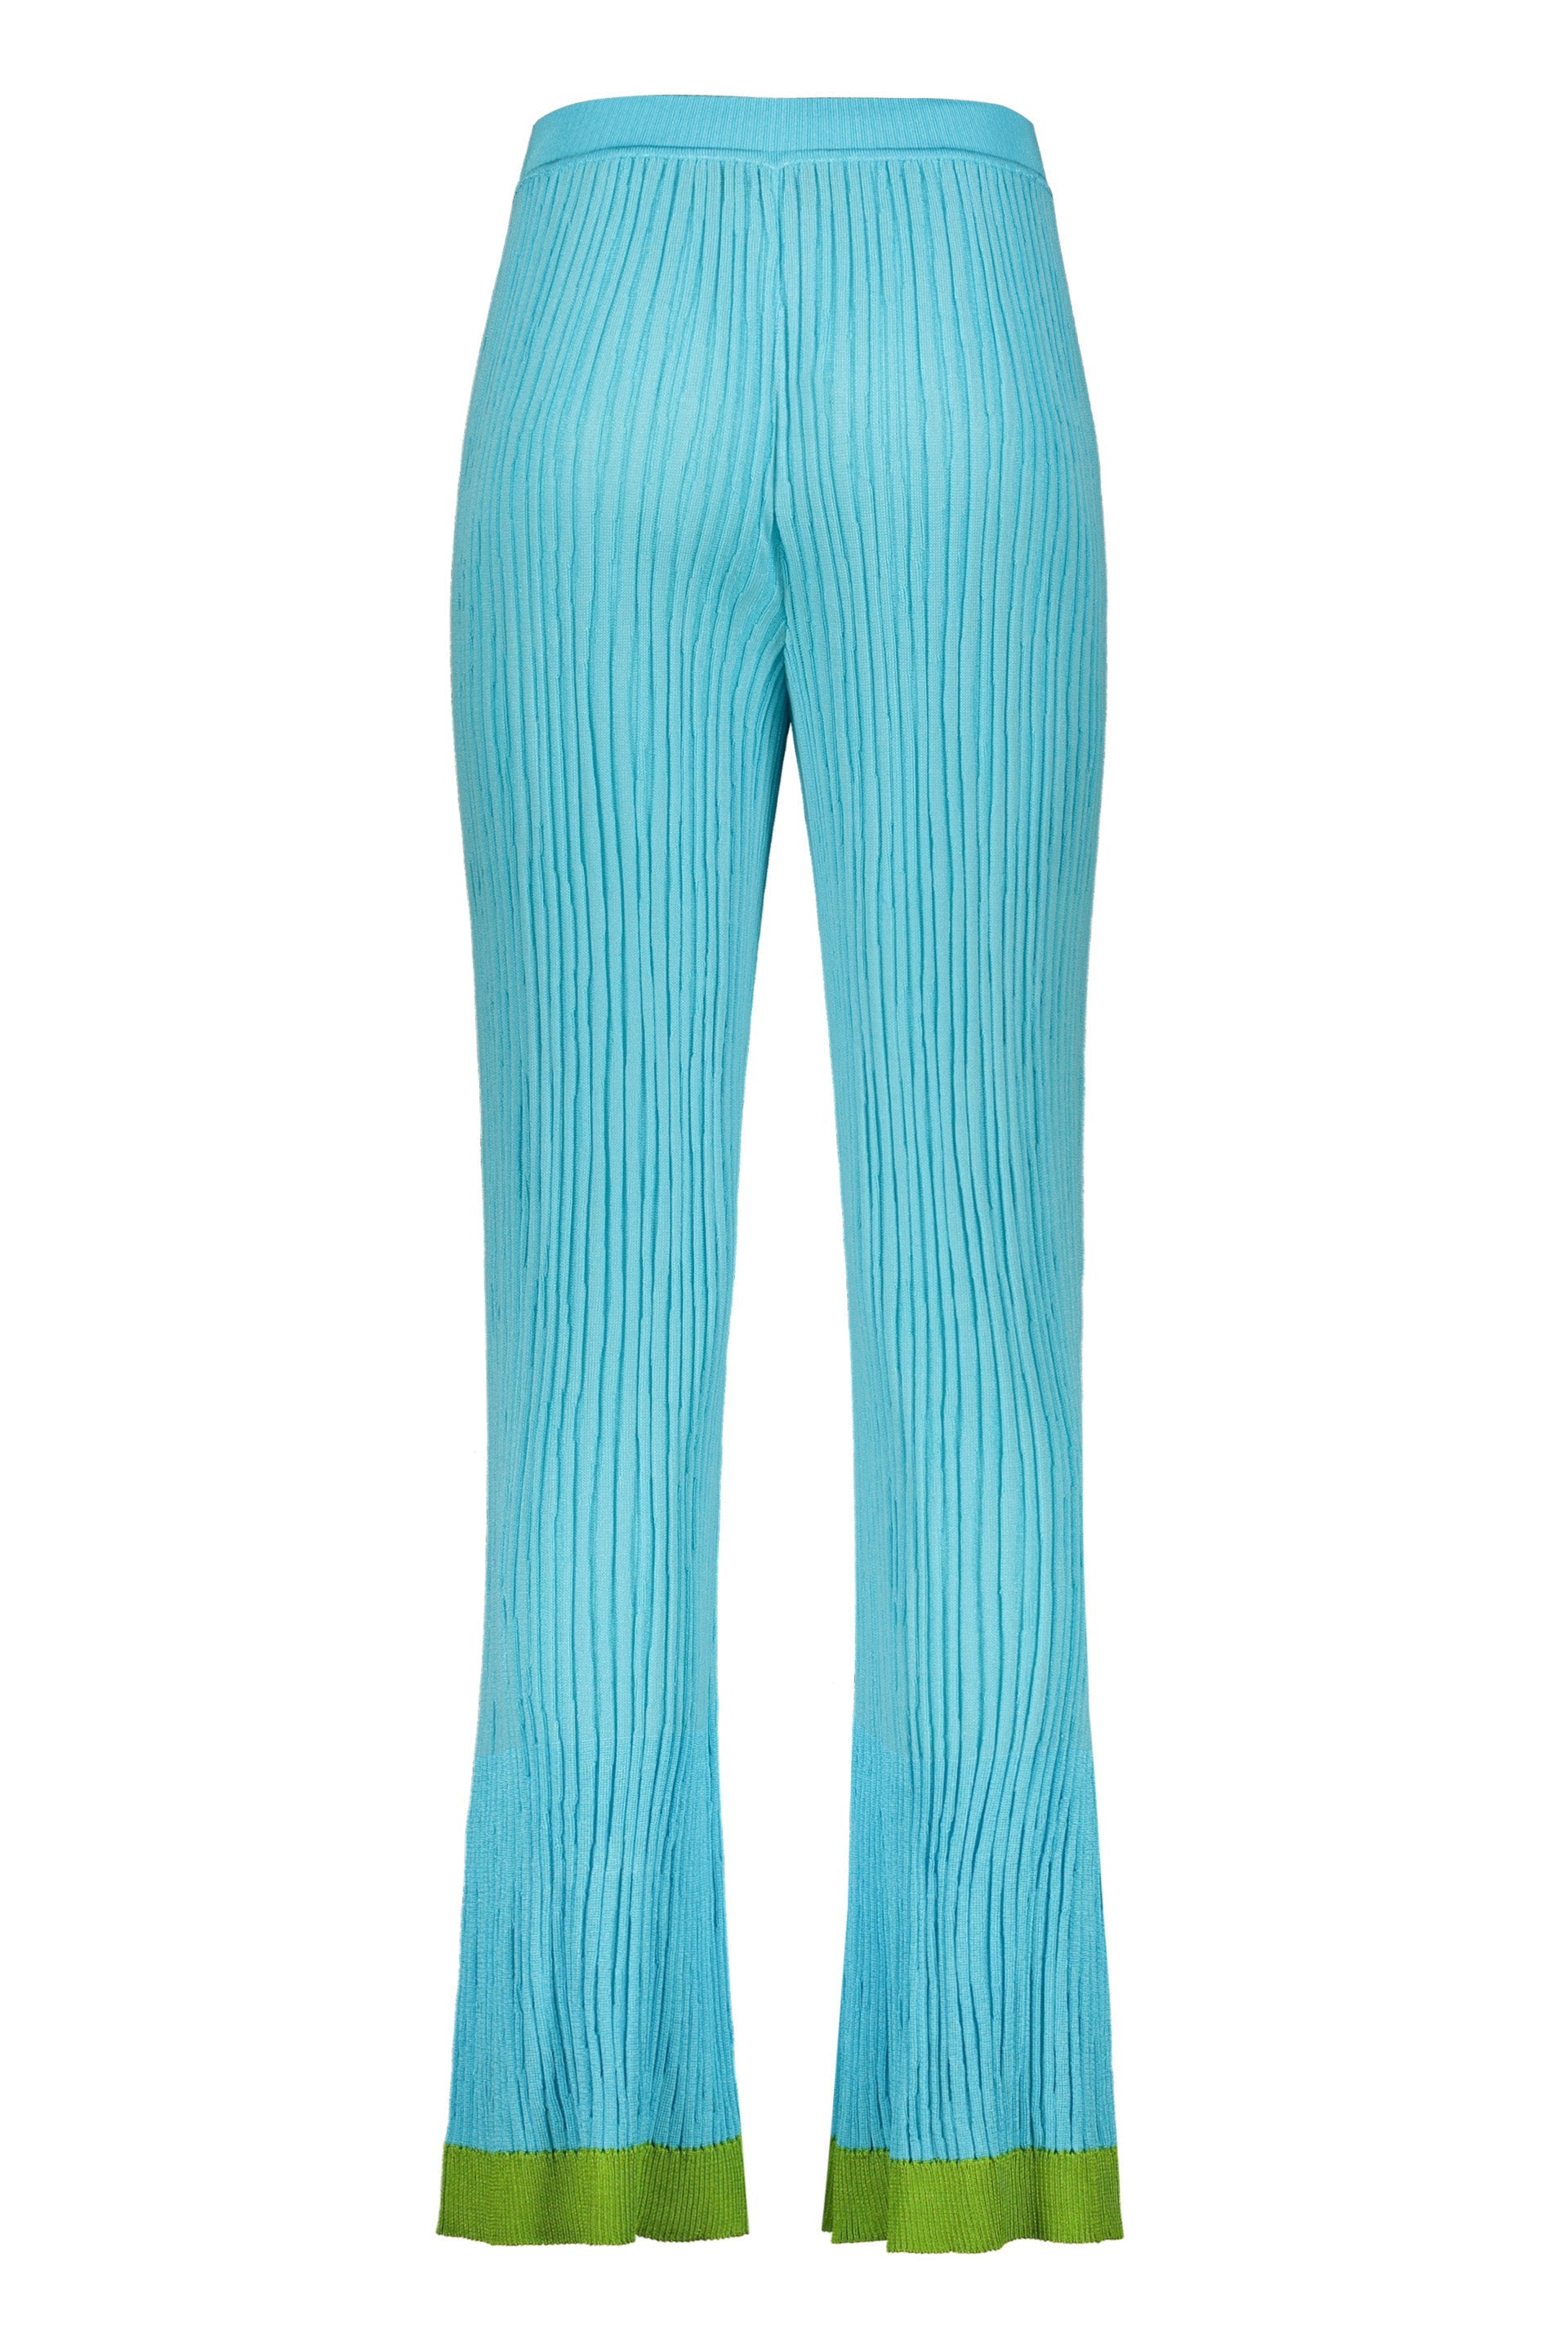 Missoni-OUTLET-SALE-Knitted-trousers-Hosen-ARCHIVE-COLLECTION-2.jpg